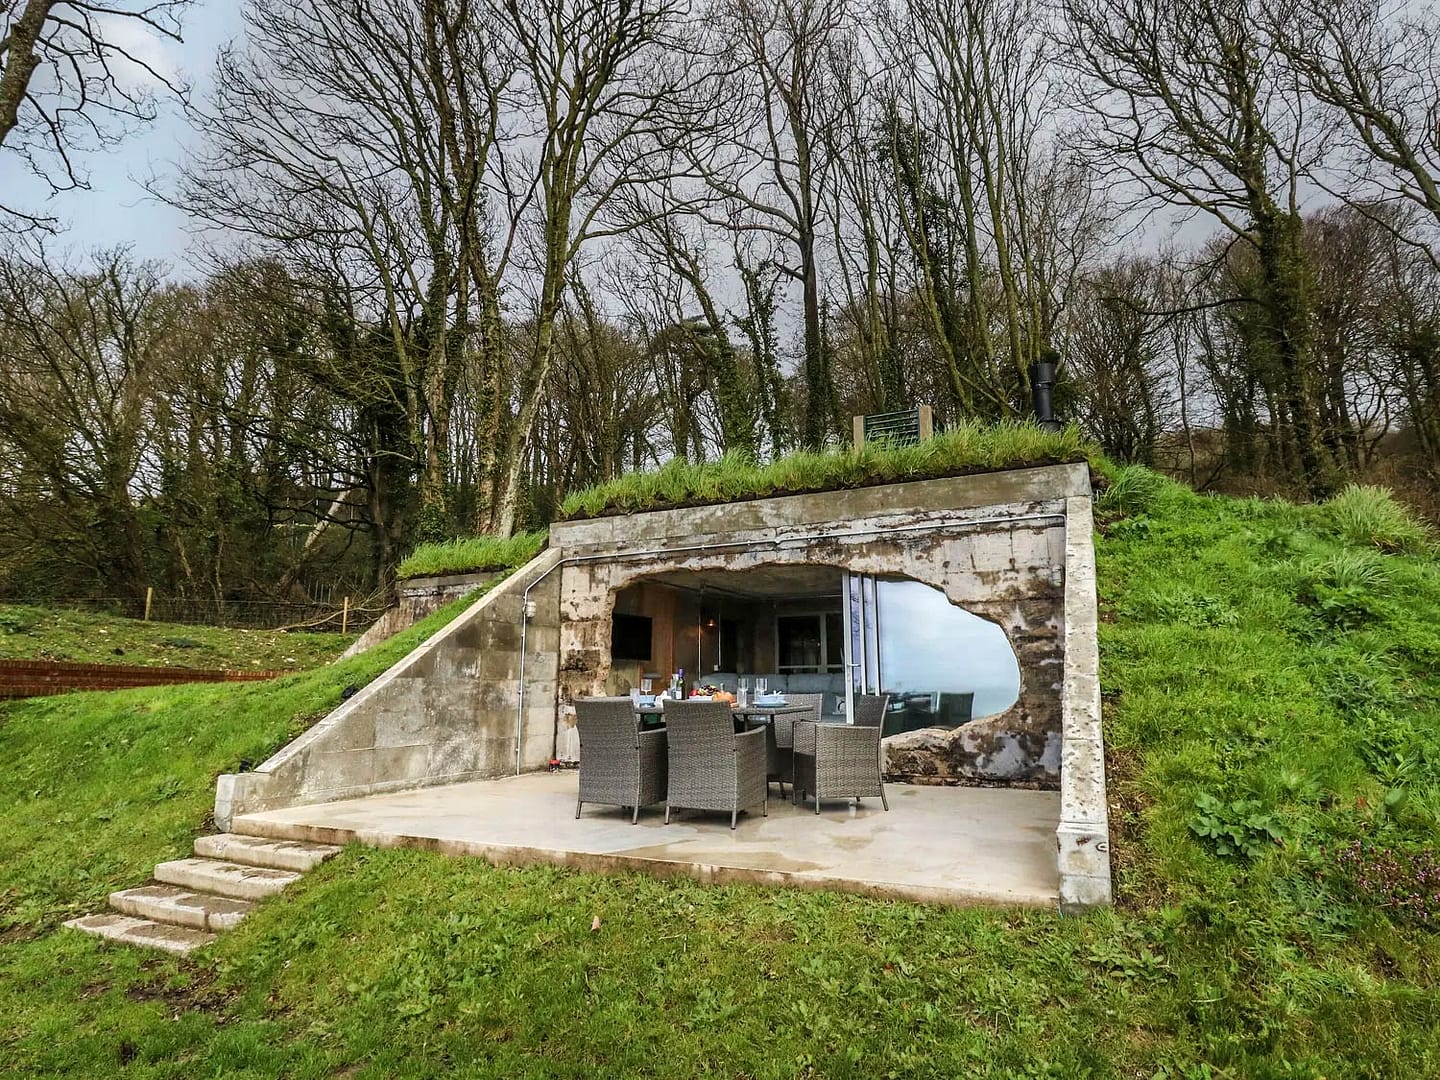 Converted Transmission bunker with green roof and entertainment space